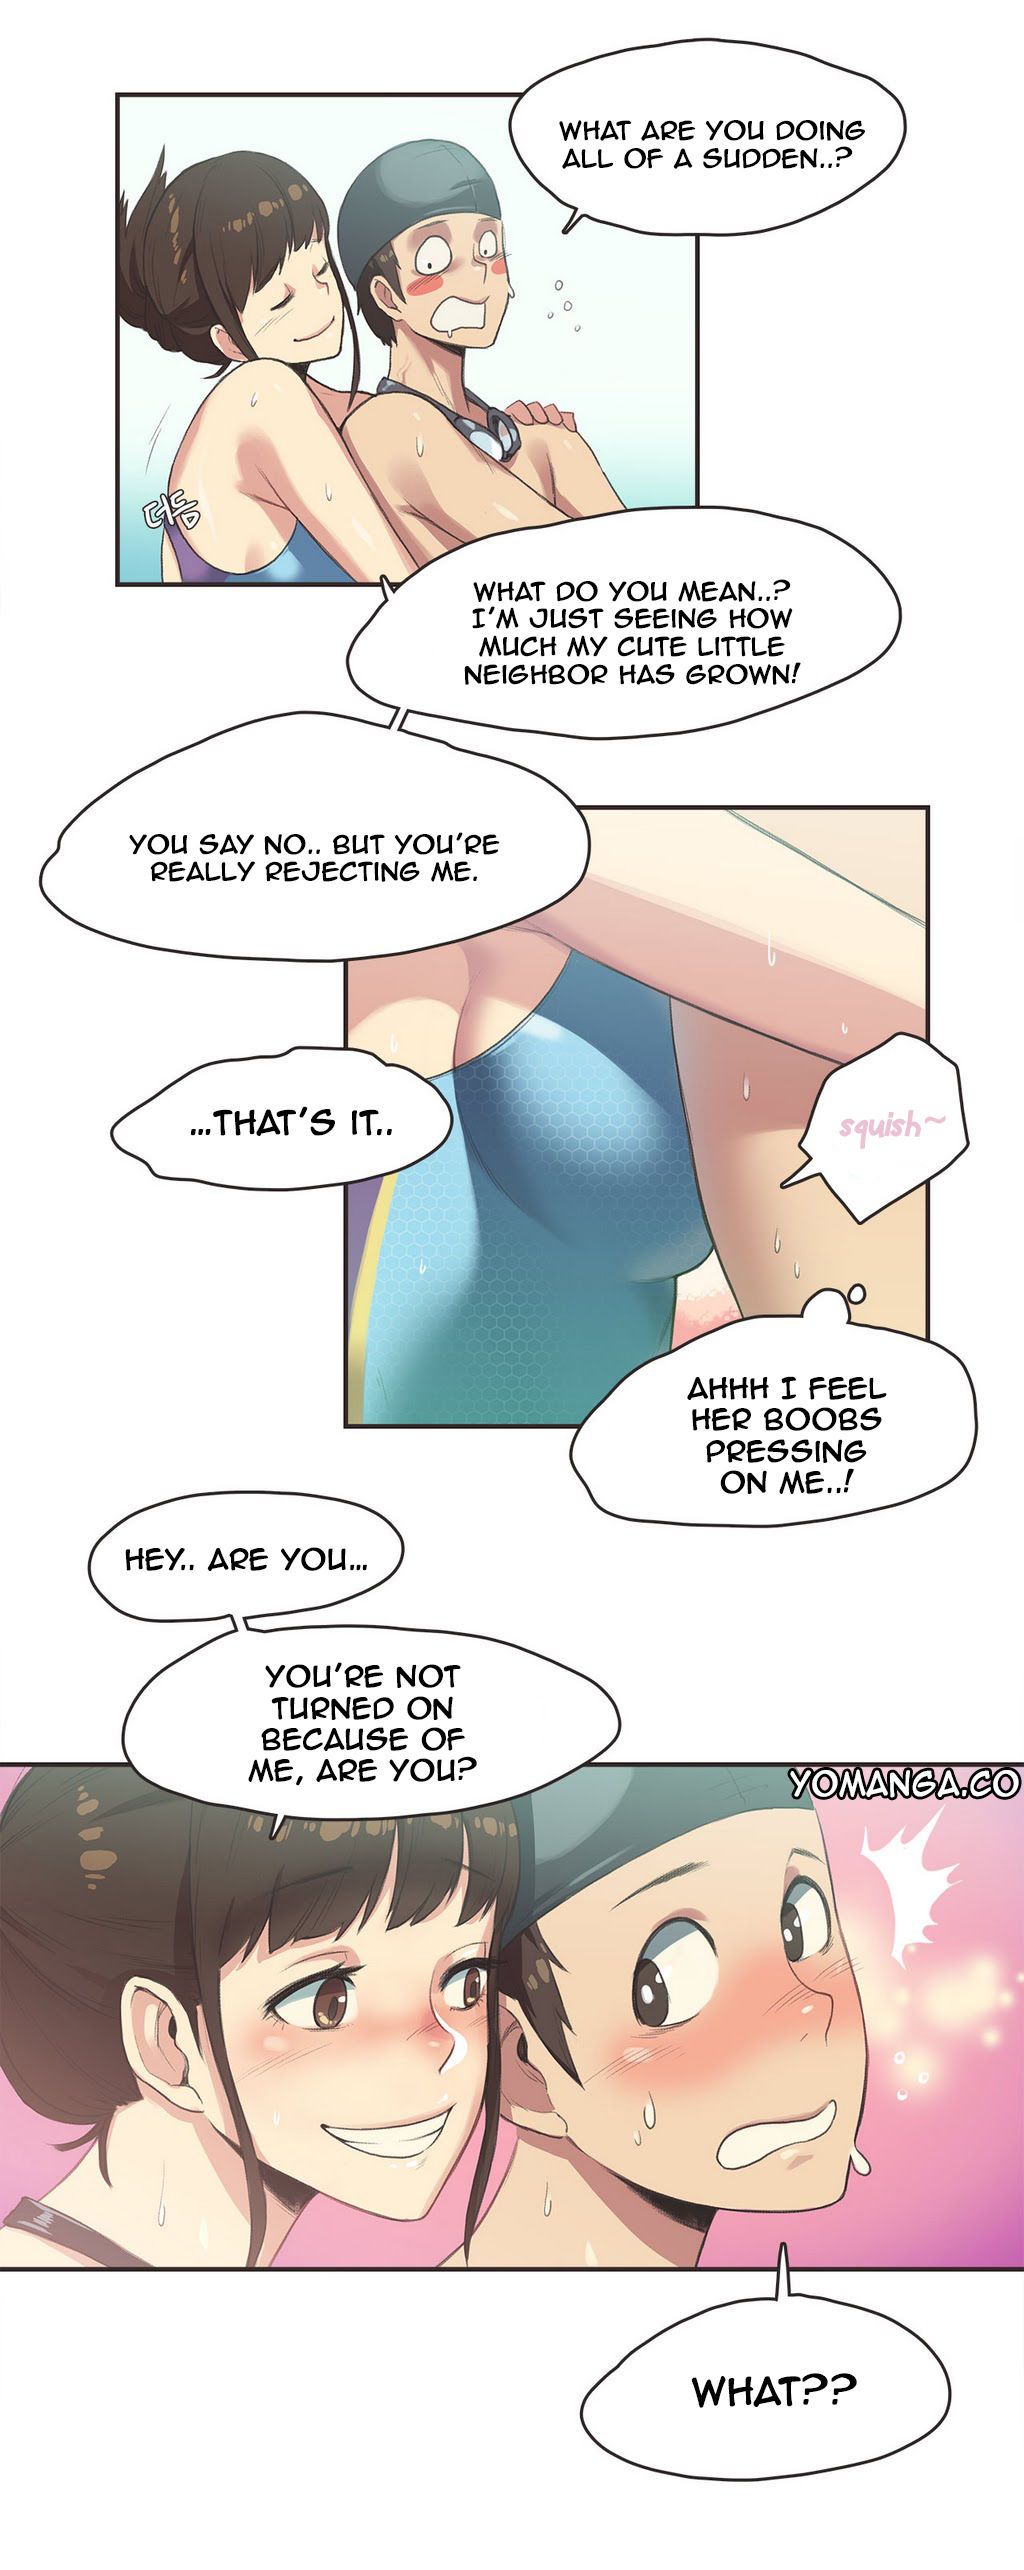 gamang sports Fille ch.1 28 () (yomanga) PARTIE 6